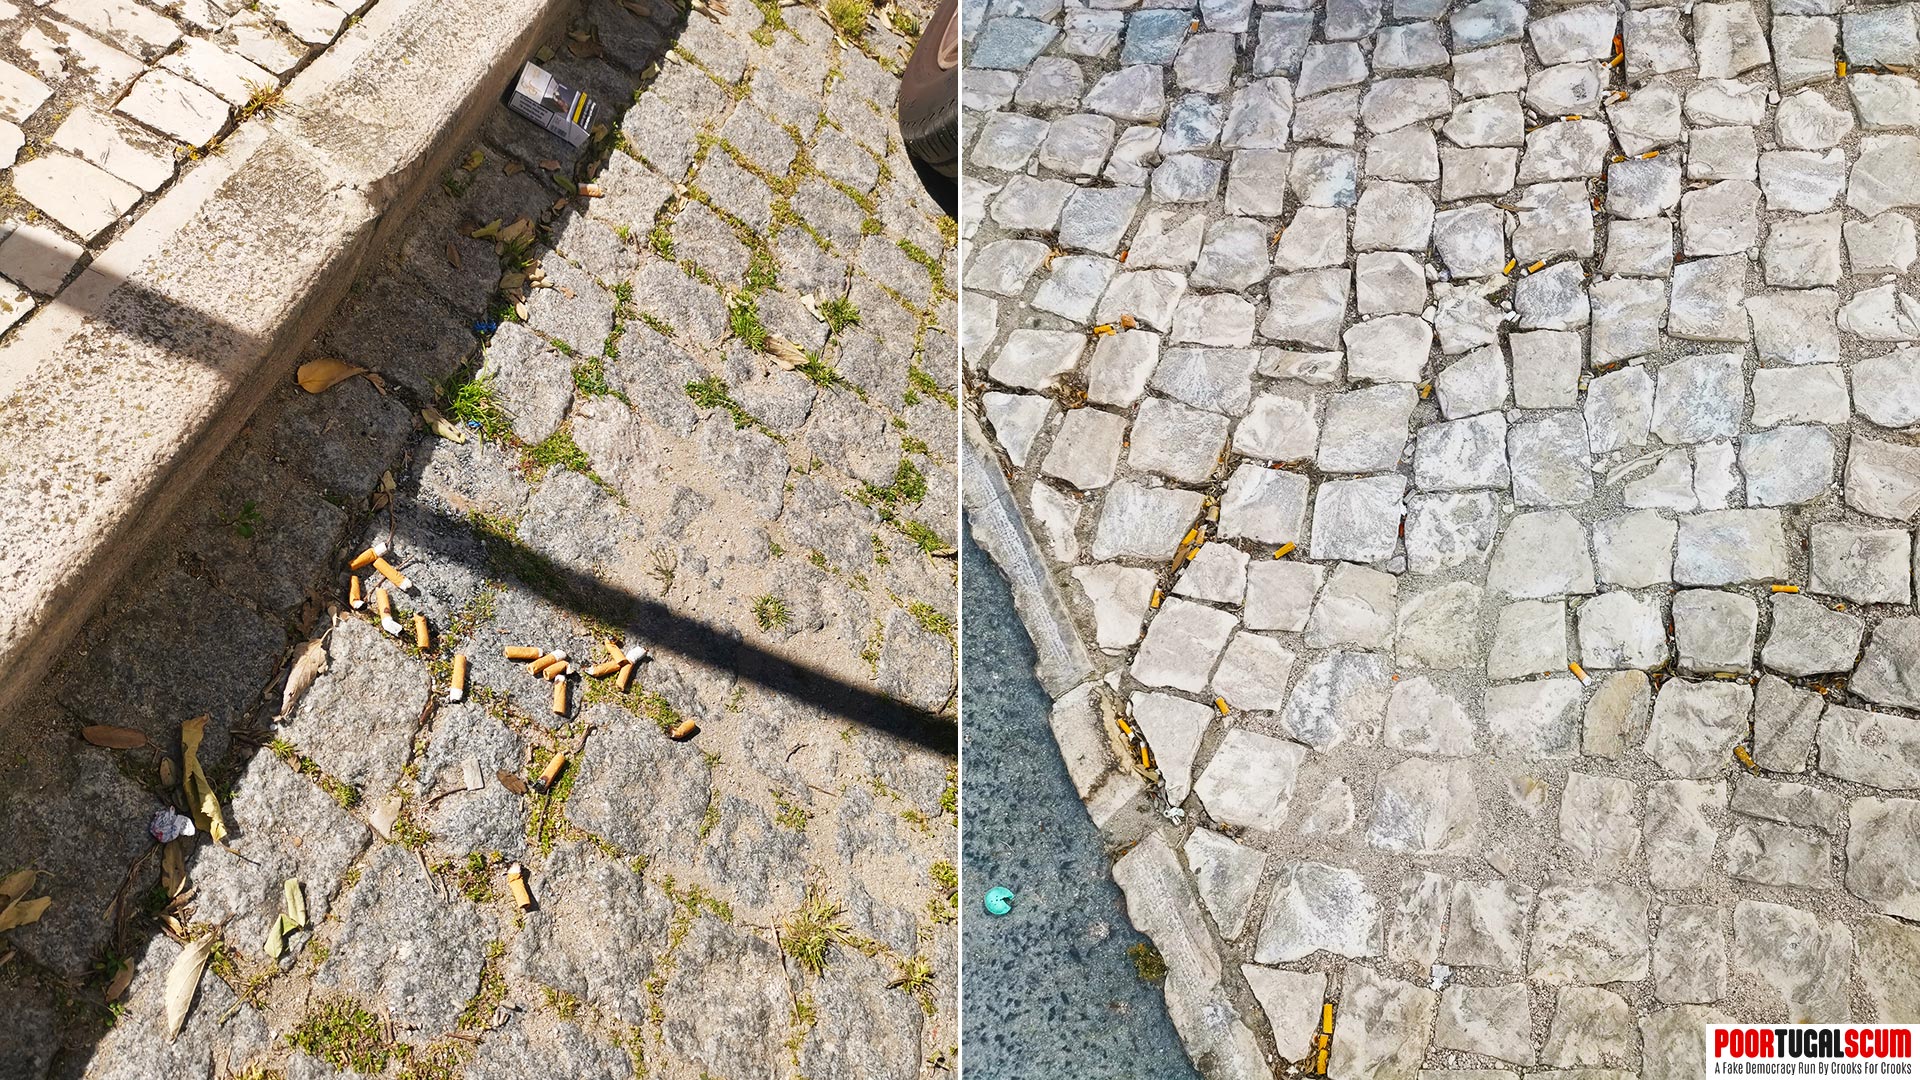 Cigarette butts thrown on Portuguese streets